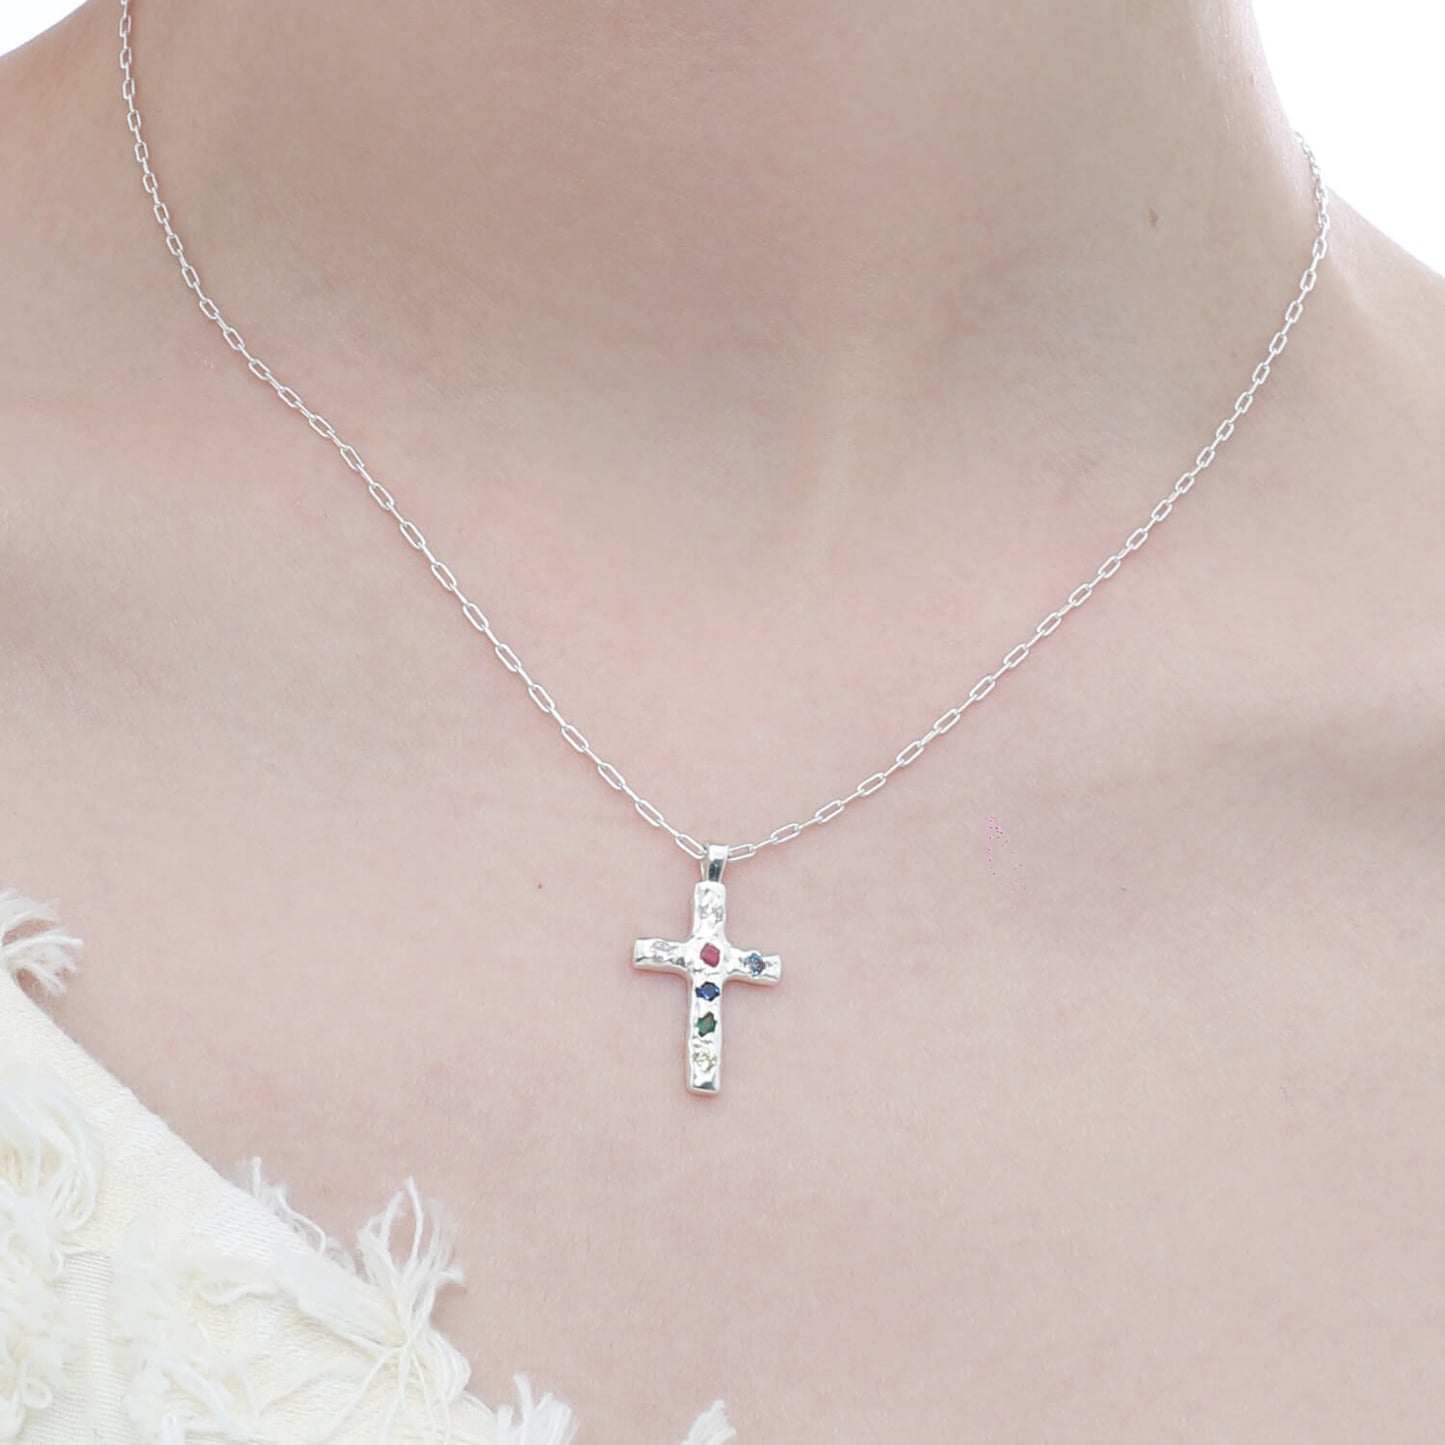 Silver Cross Necklace with Zircon Inlay | Buy at Khanie